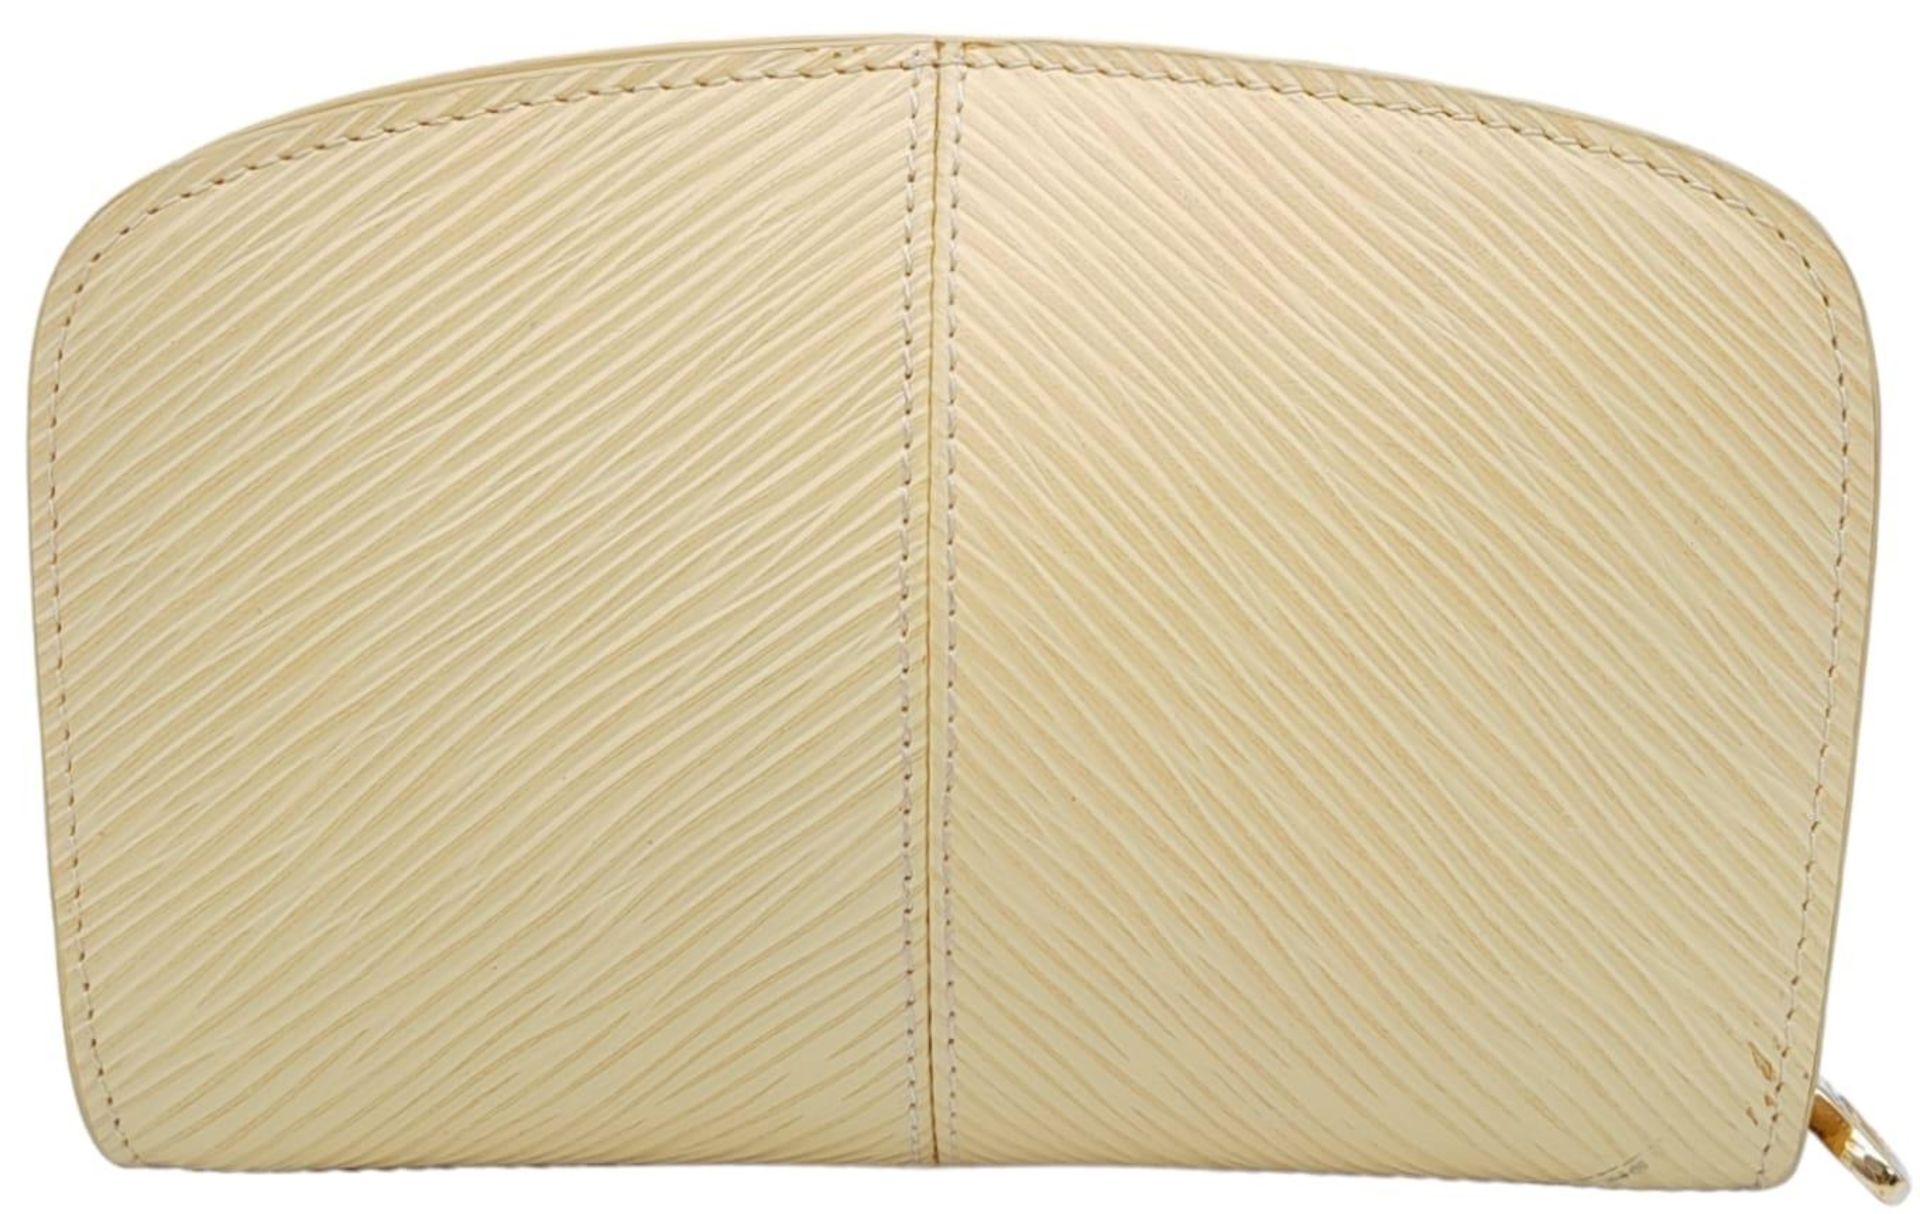 A Louis Vuitton Vanilla Wallet. Epi leather exterior gold-toned hardware and zipped top closure. - Image 3 of 9